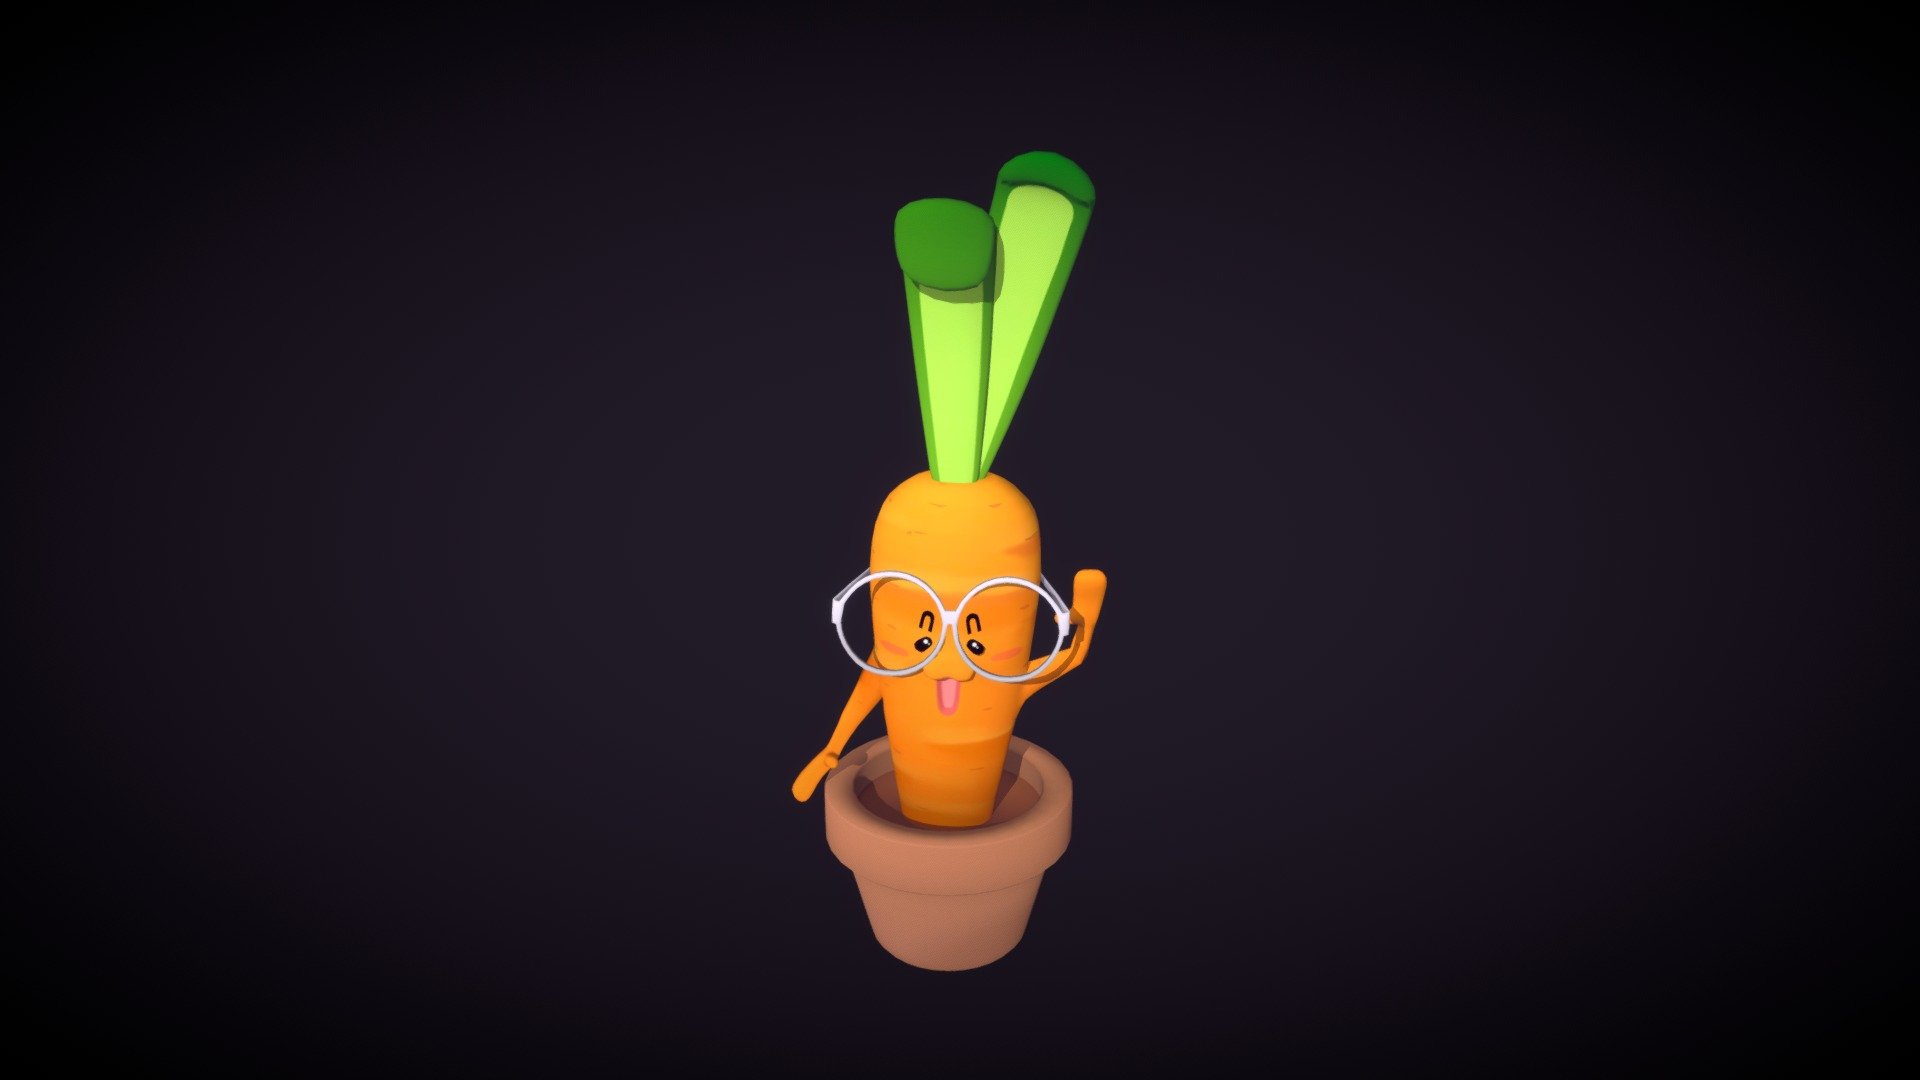 A friendly little carrot complete with a basic idle animation.

Made with Blender and Substance Painter - Cute Carrot Sidekick - 3D model by necrosoup 3d model